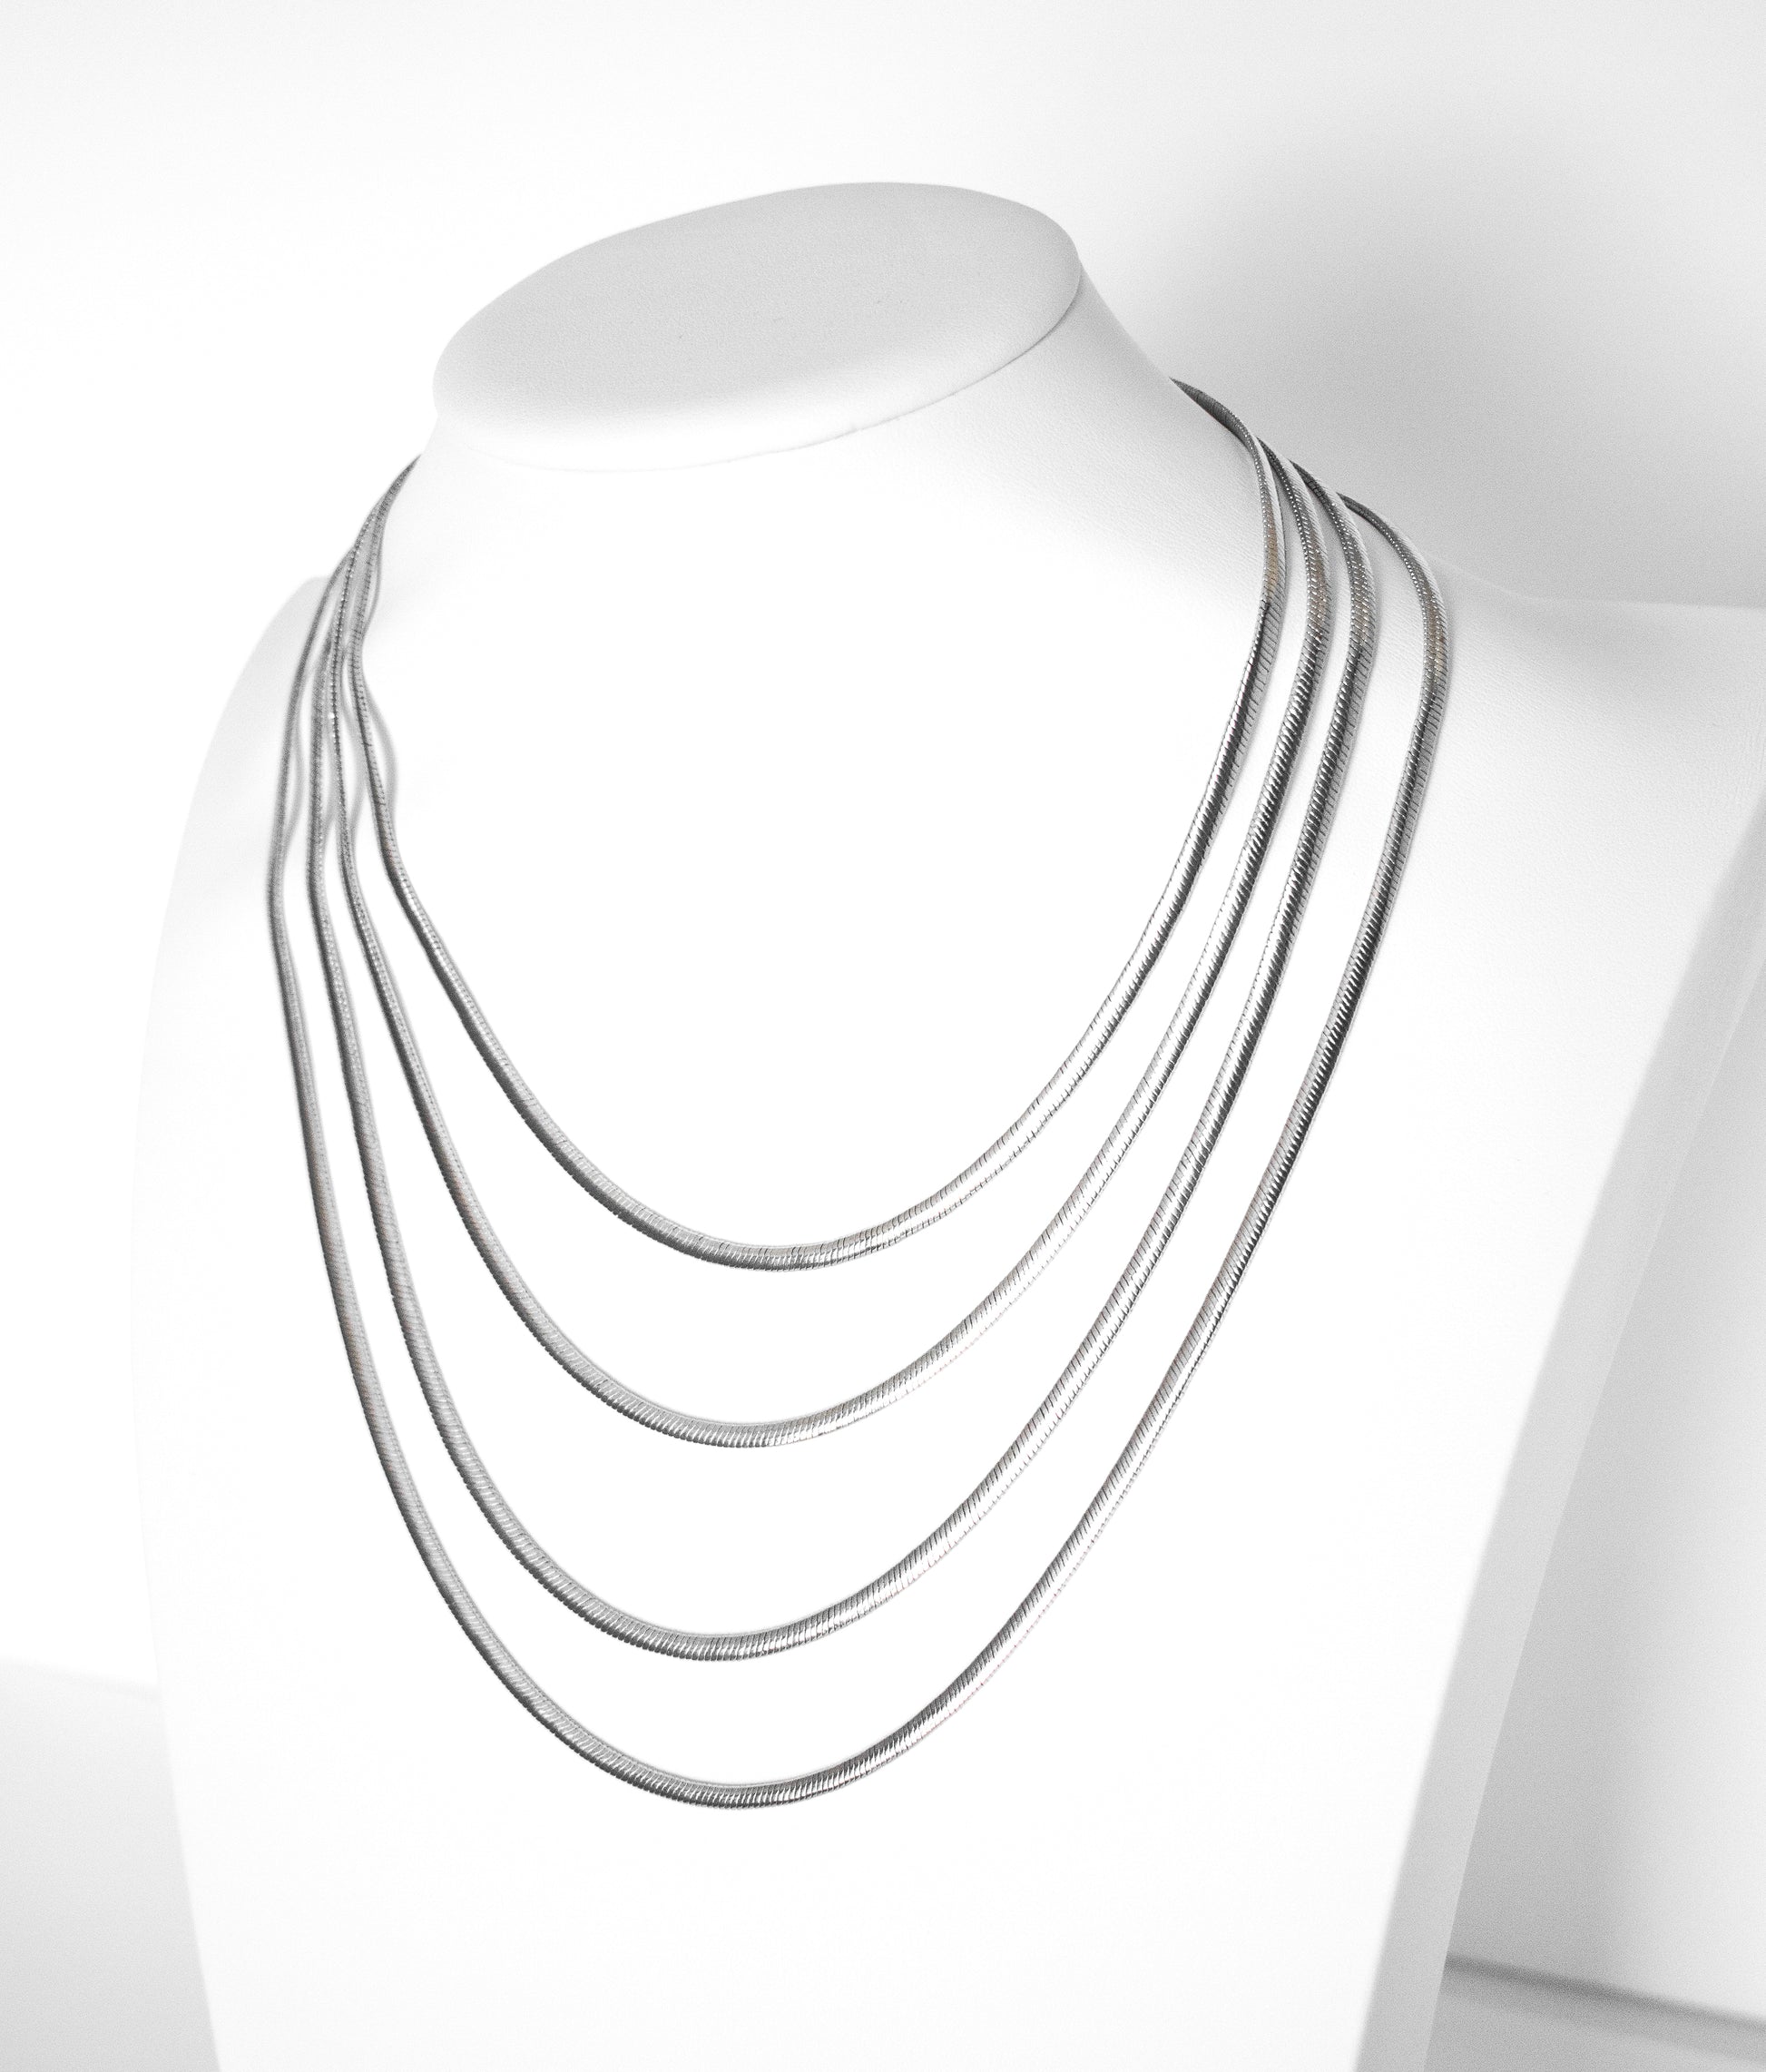 snake necklaces with a wide range of lengths